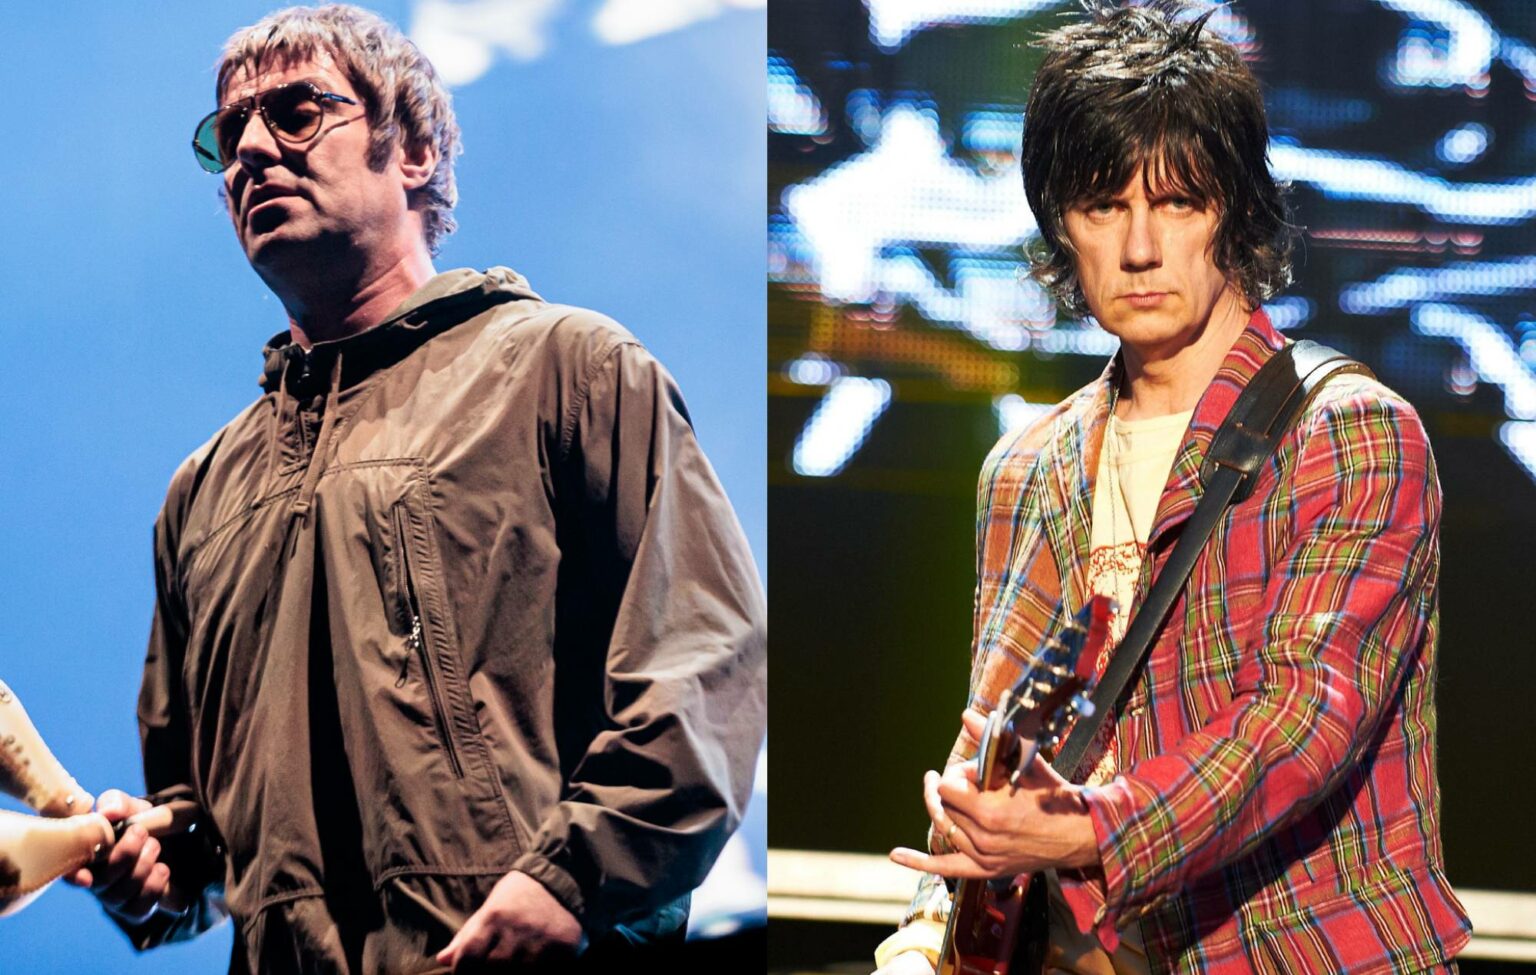 Liam Gallagher and John Squire debut new collab single ‘Just Another ...